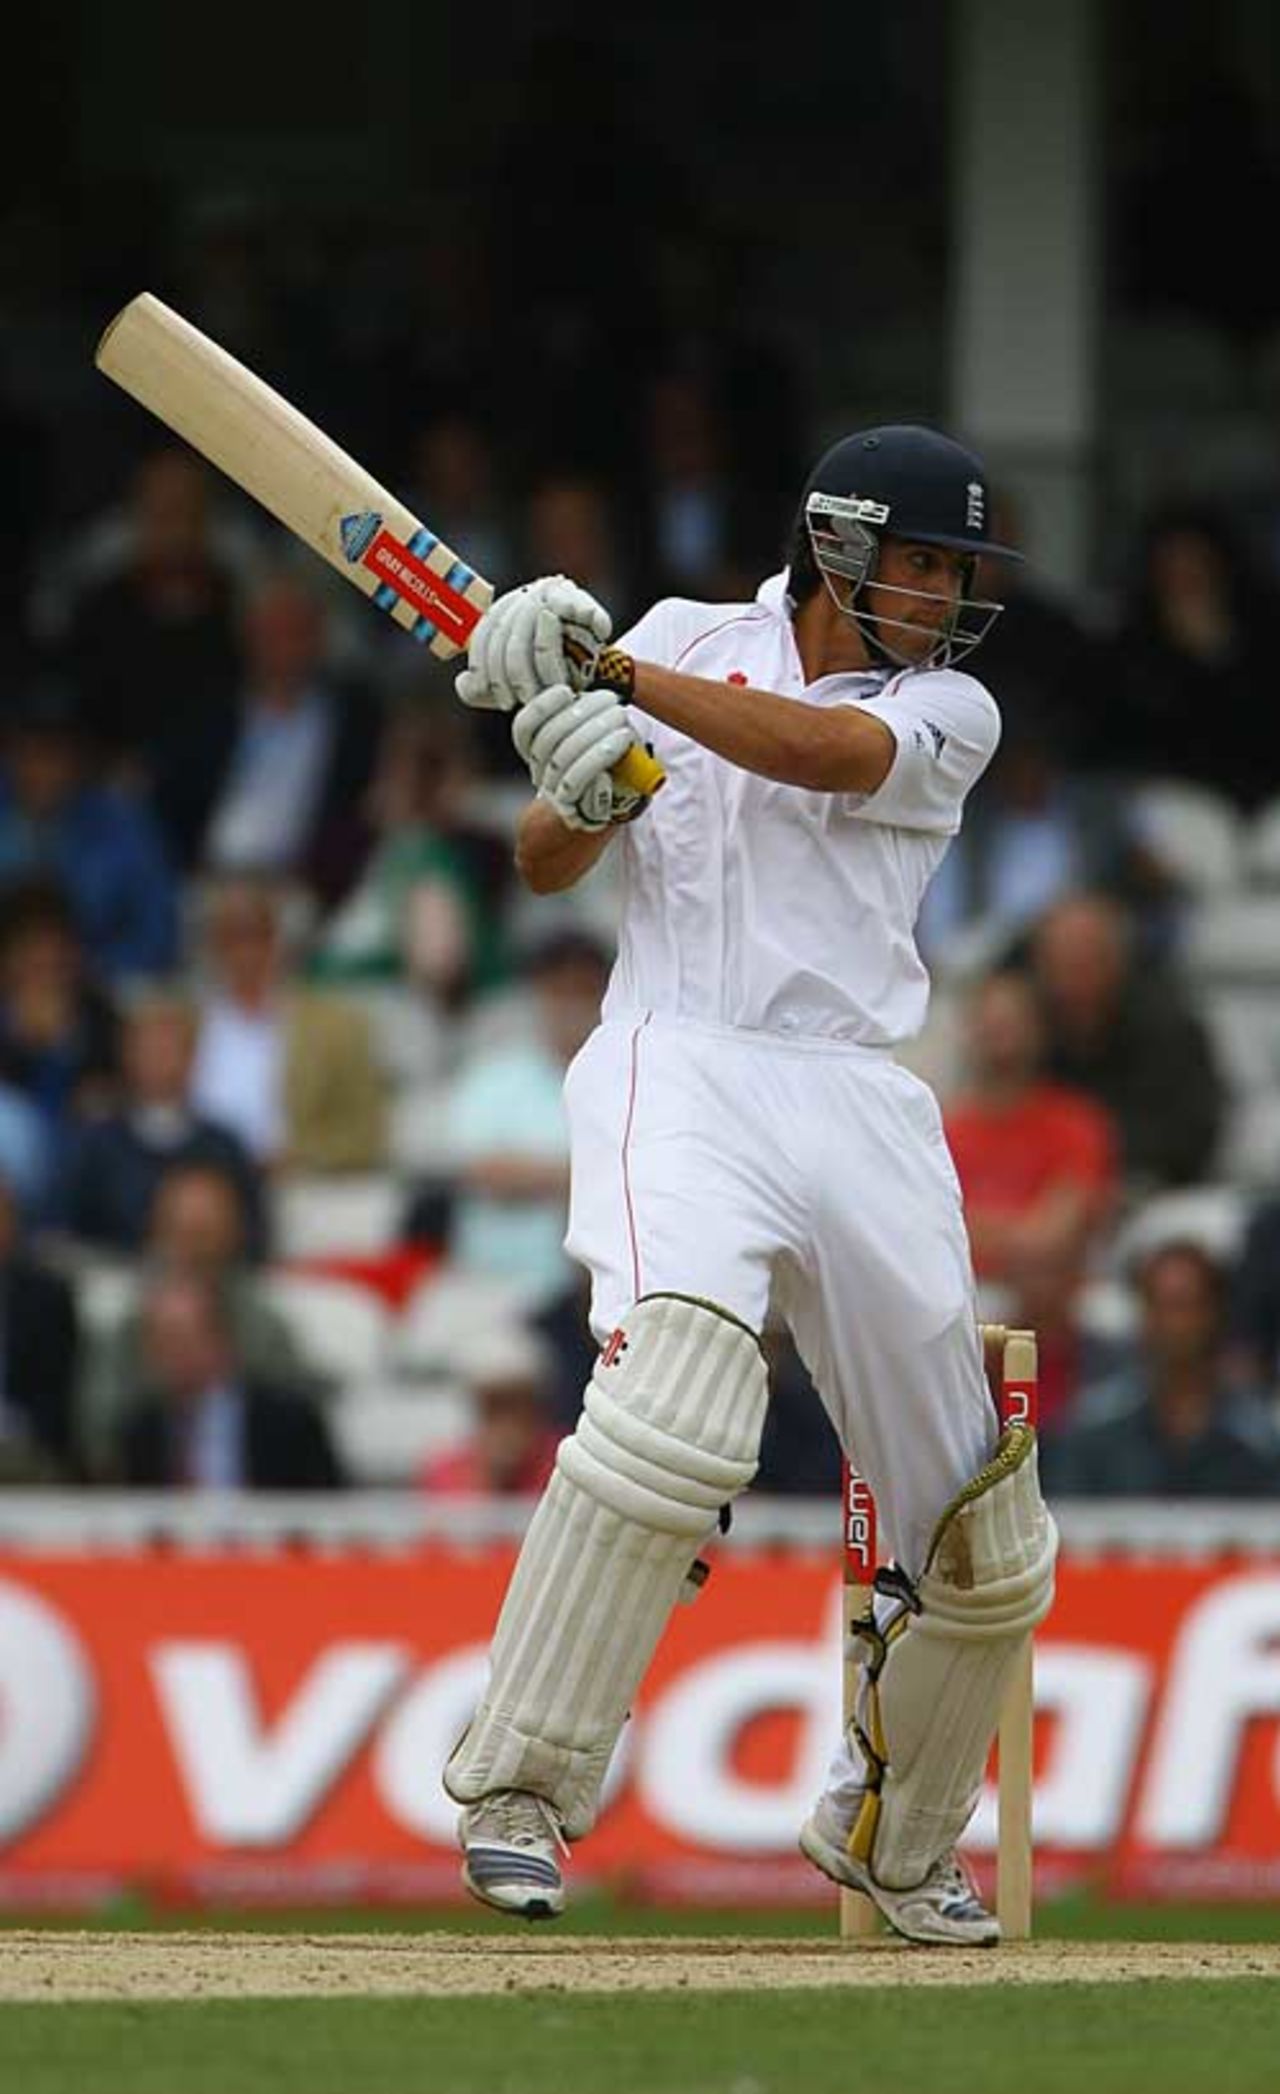 Alastair Cook cracks a boundary square during his 67, England v South Africa, 4th Test, The Oval, August 11, 2008